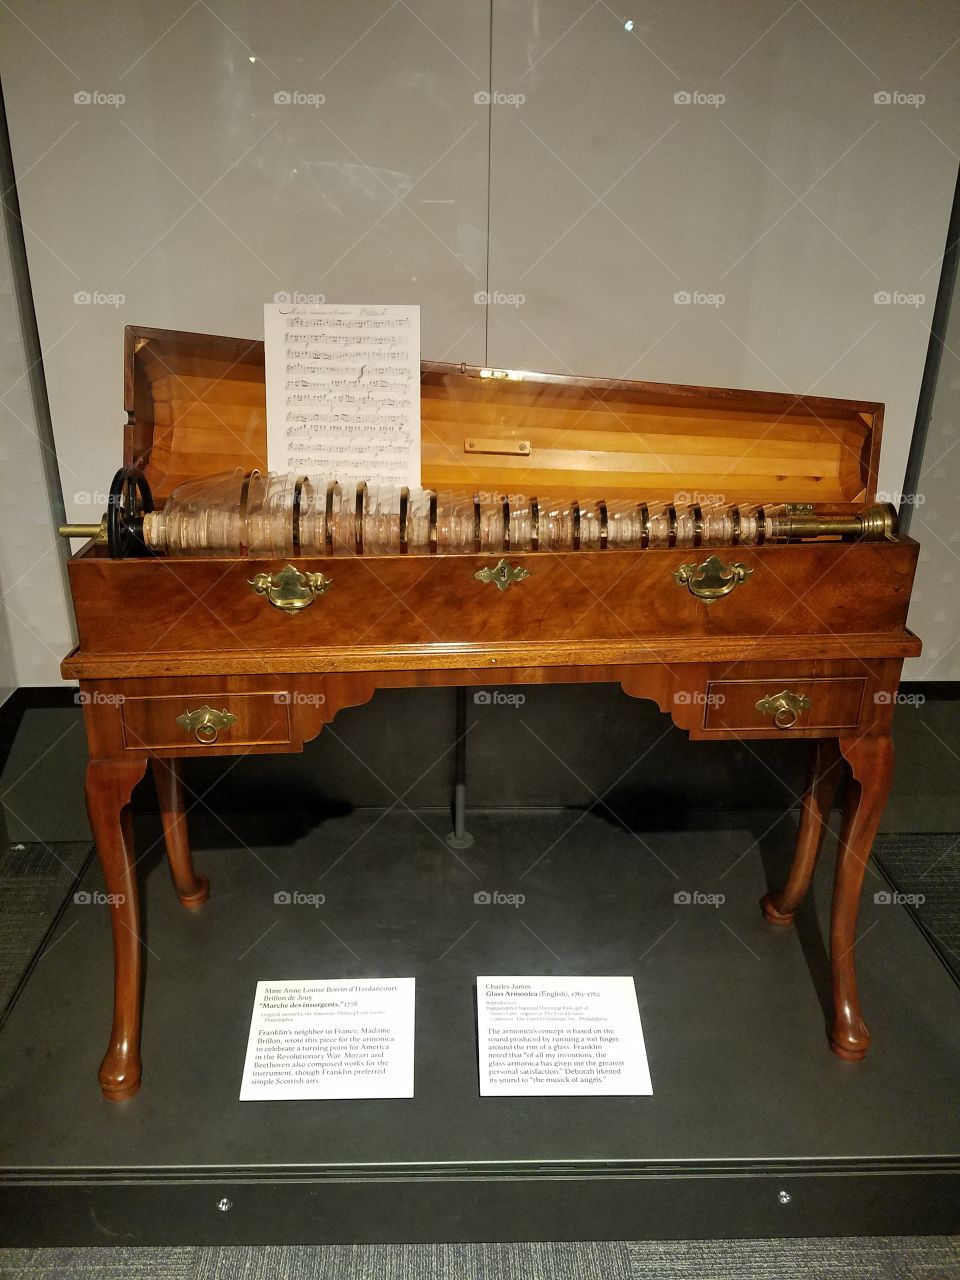 Glass armonica made by Ben Franklin